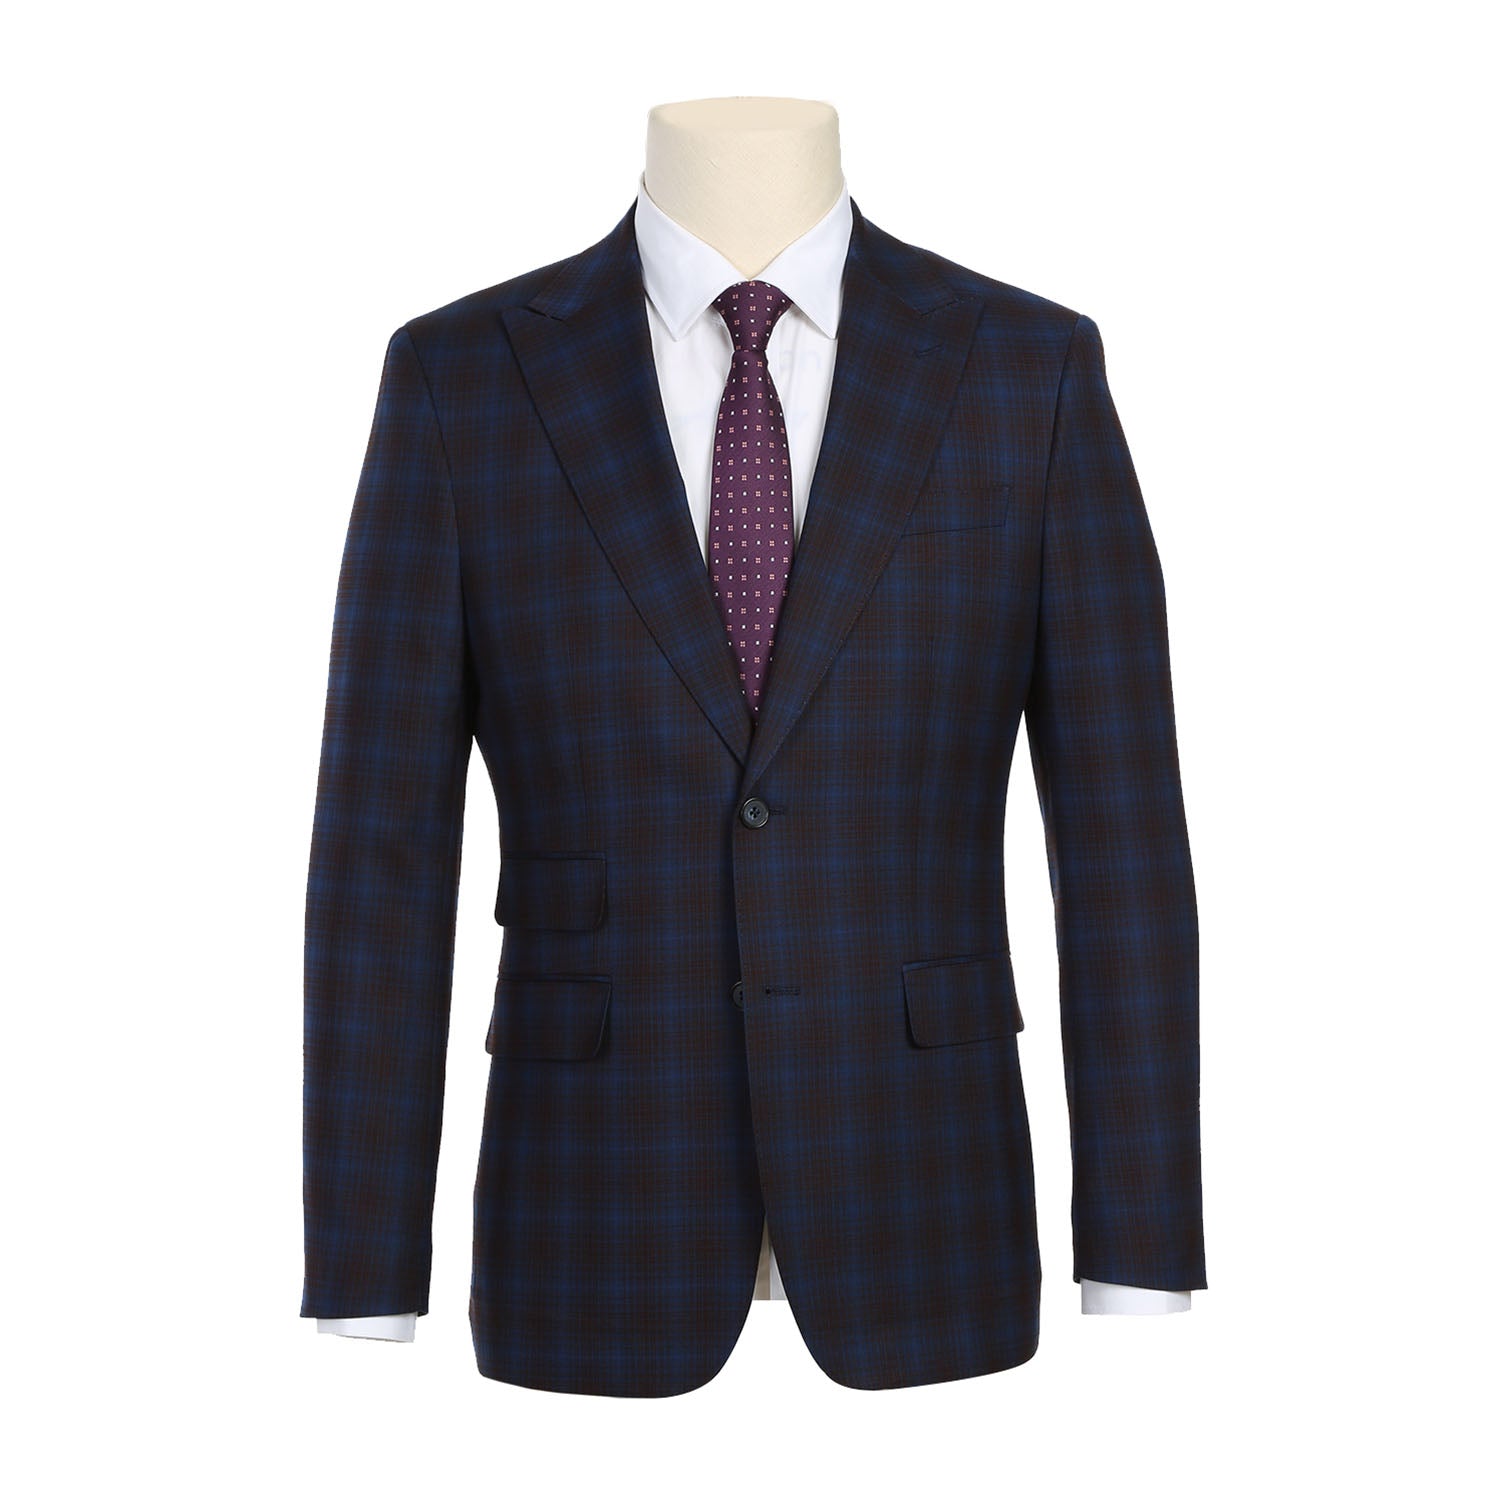 English Laundry Navy with Burgundy Check Suit